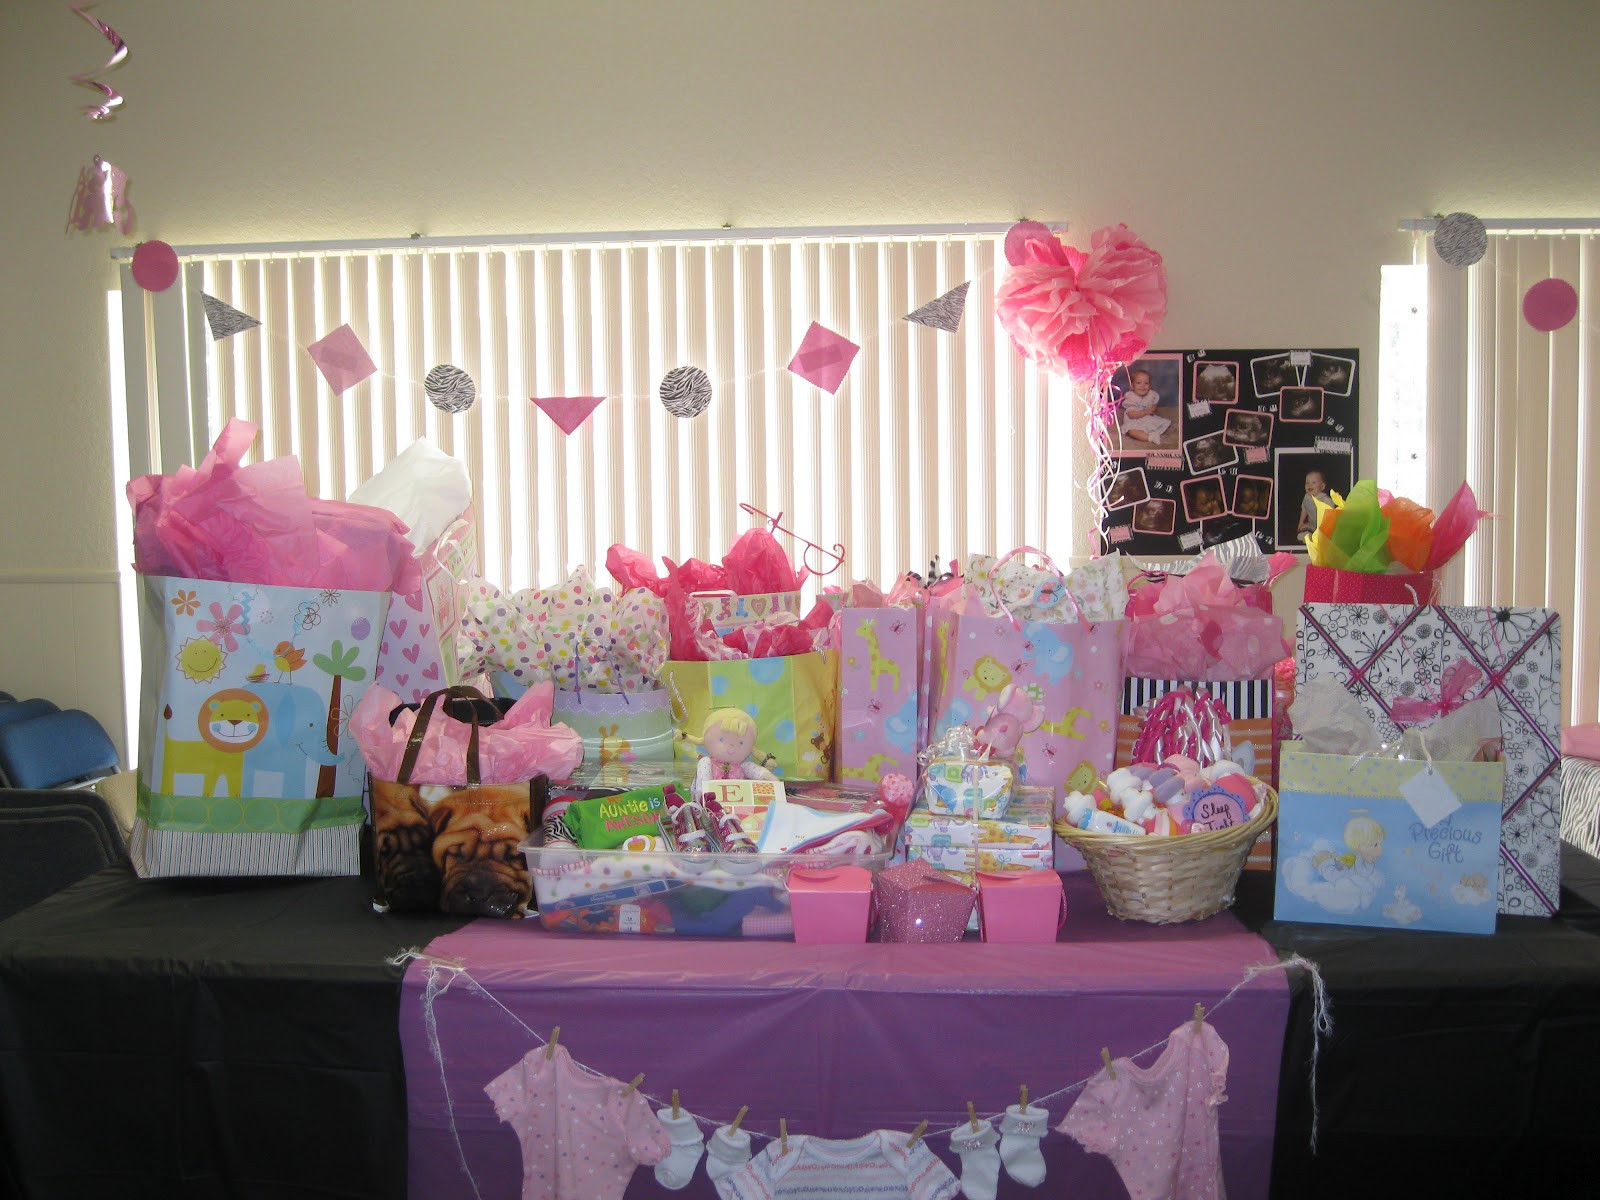 Decorating Ideas For Baby Shower Gift Table
 Bonnie s Crafty Corner Zebra themed baby shower